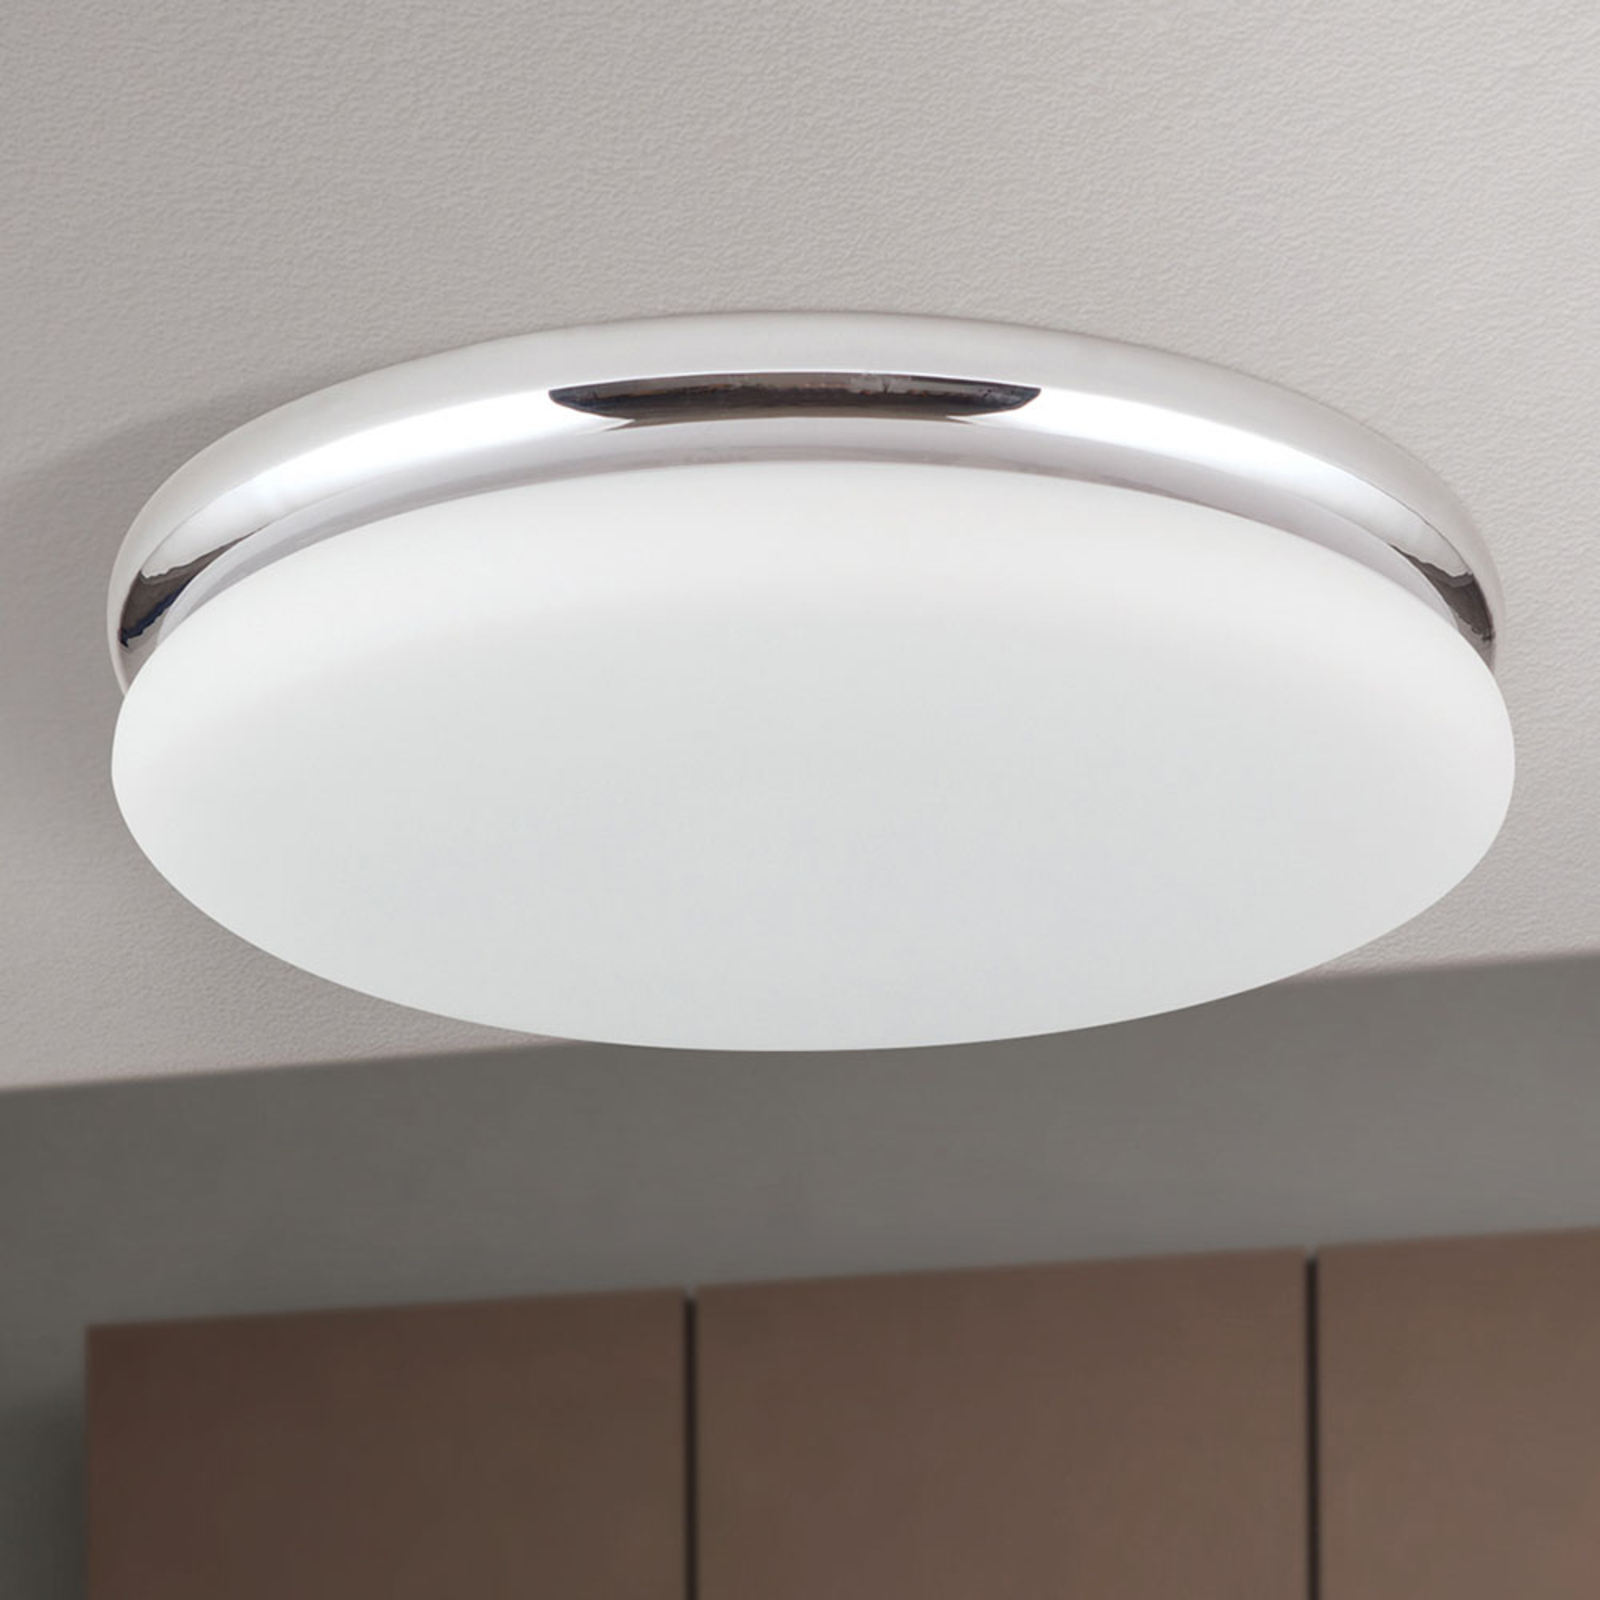 James LED ceiling light with metal housing, chrome